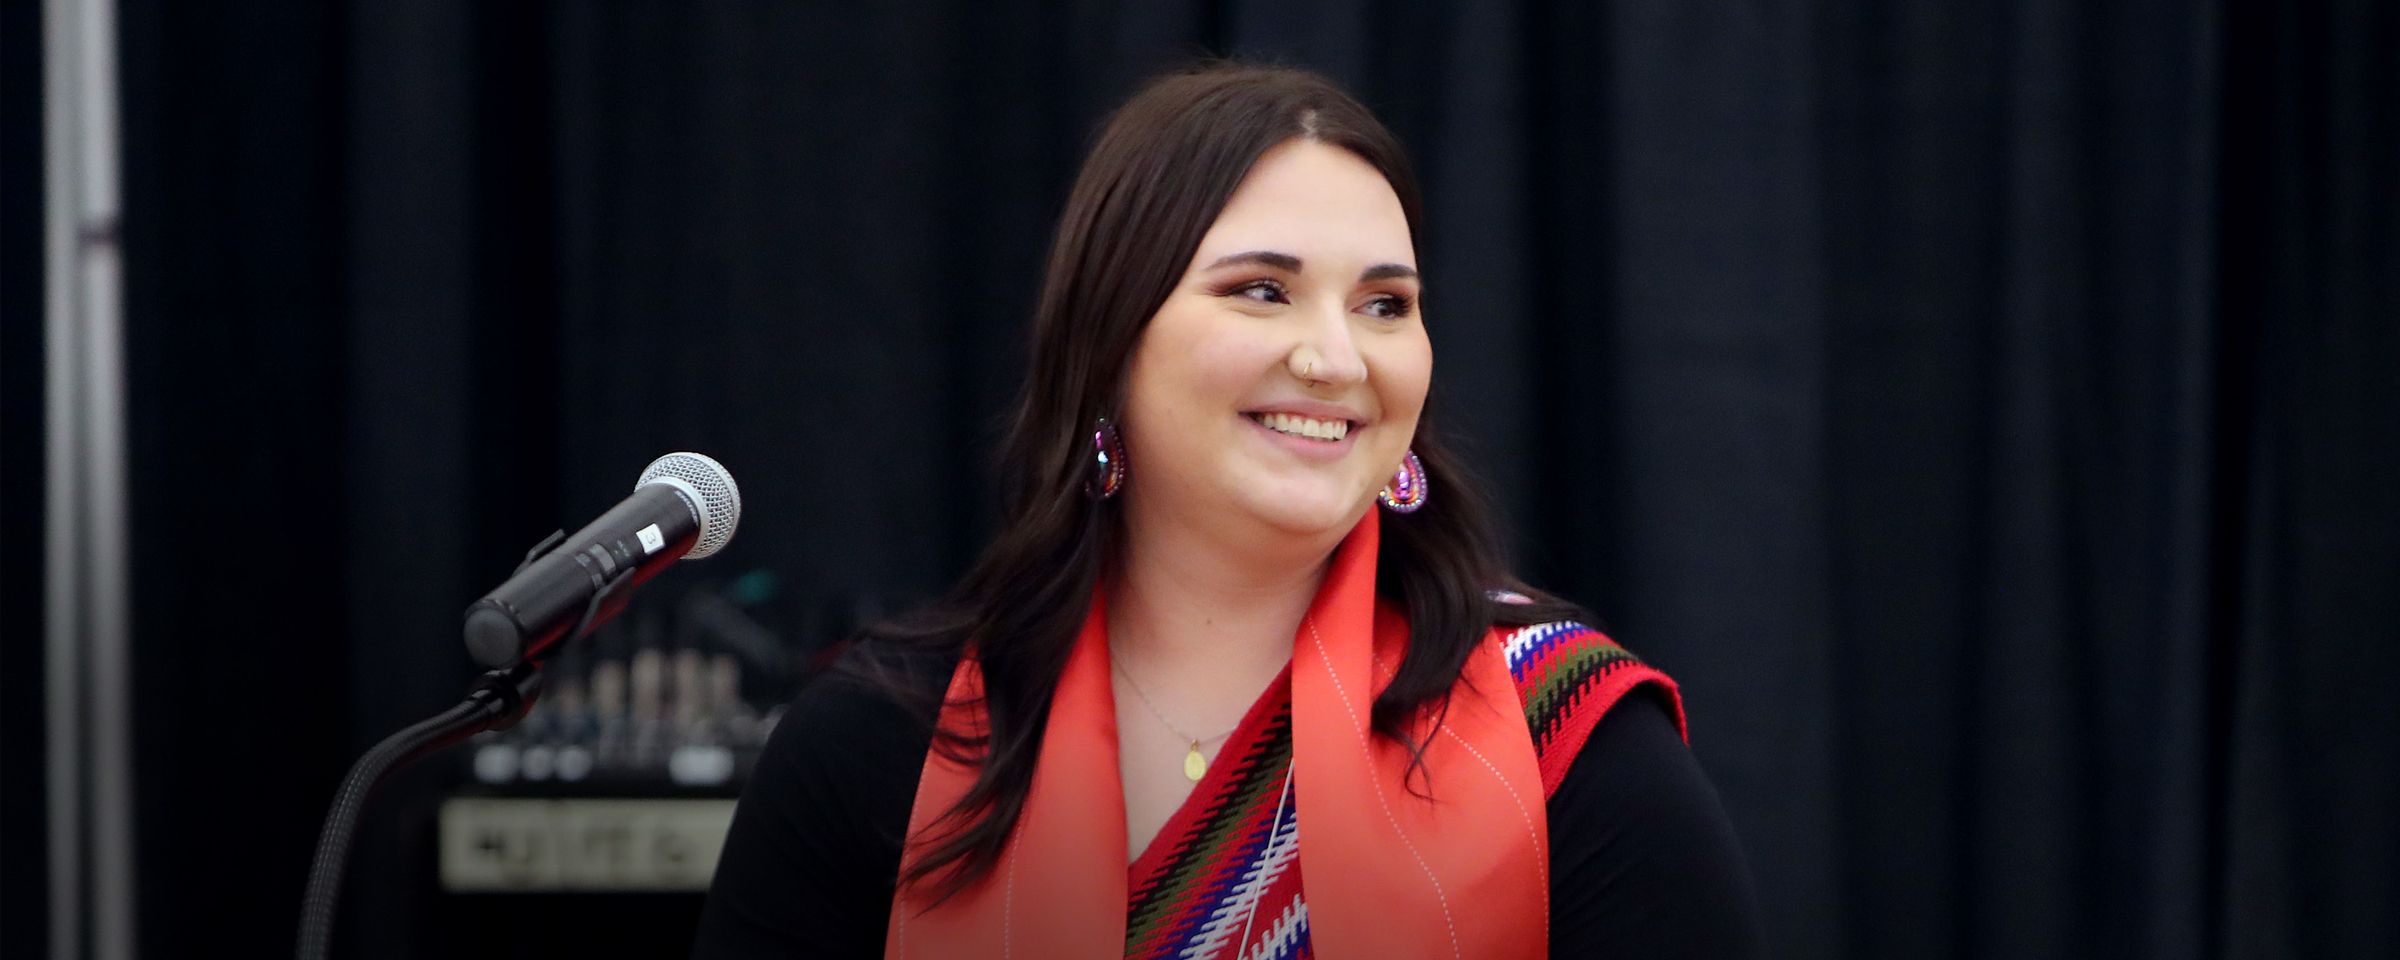 Graduate wearing an Indigenous Stole at convocation